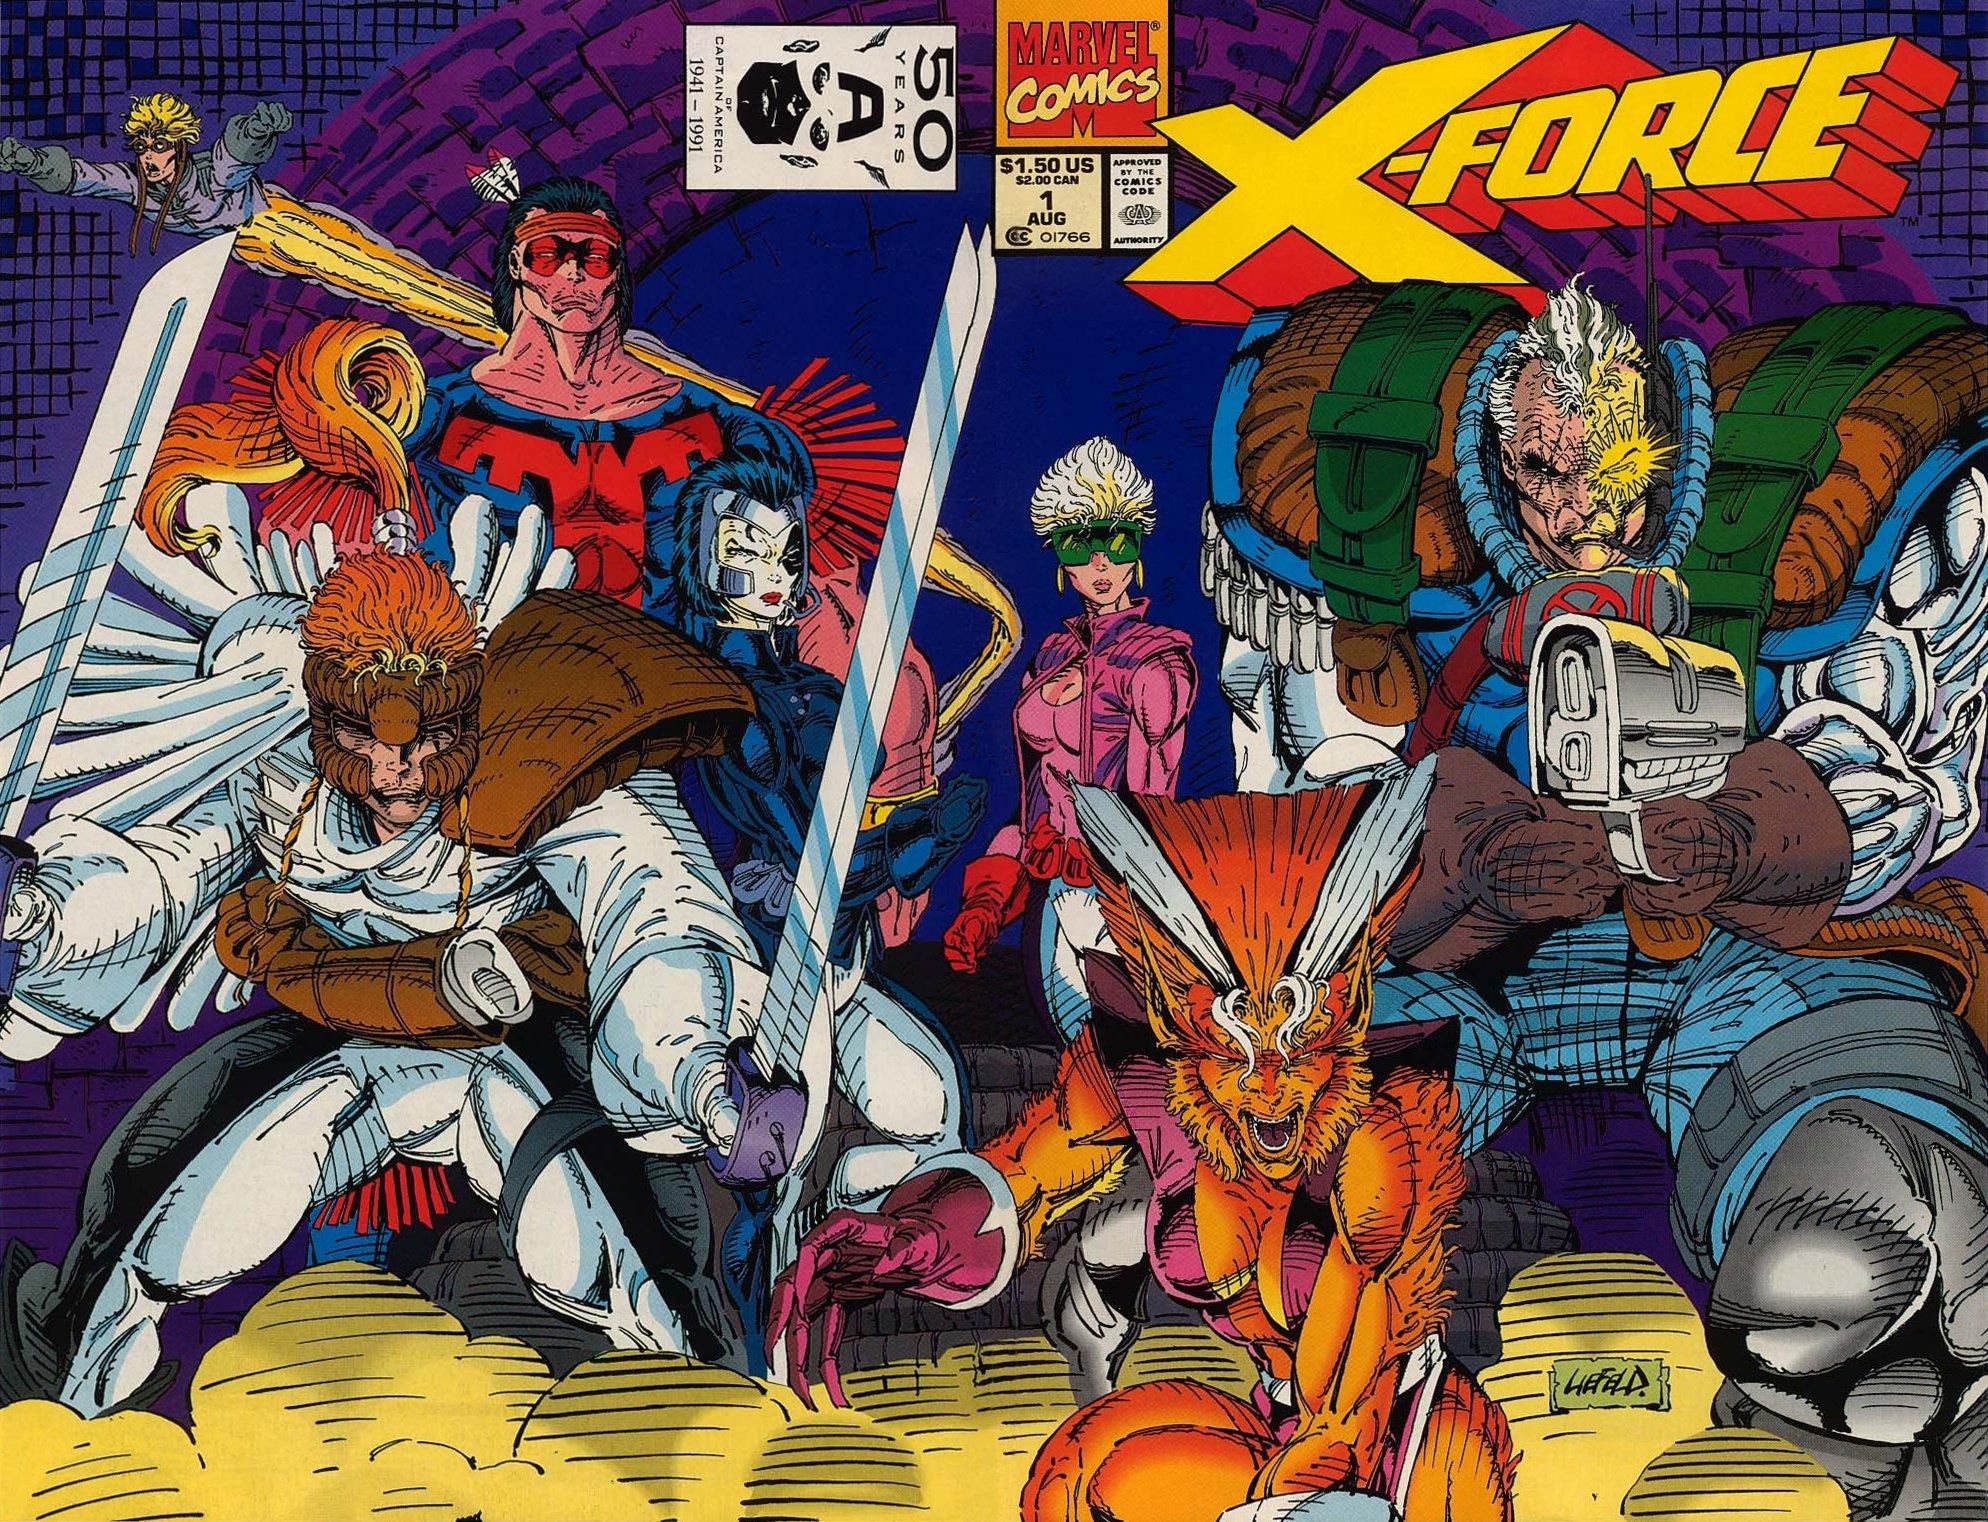 X-Force 1 Marvel Comics Cover (Featuring Cable)